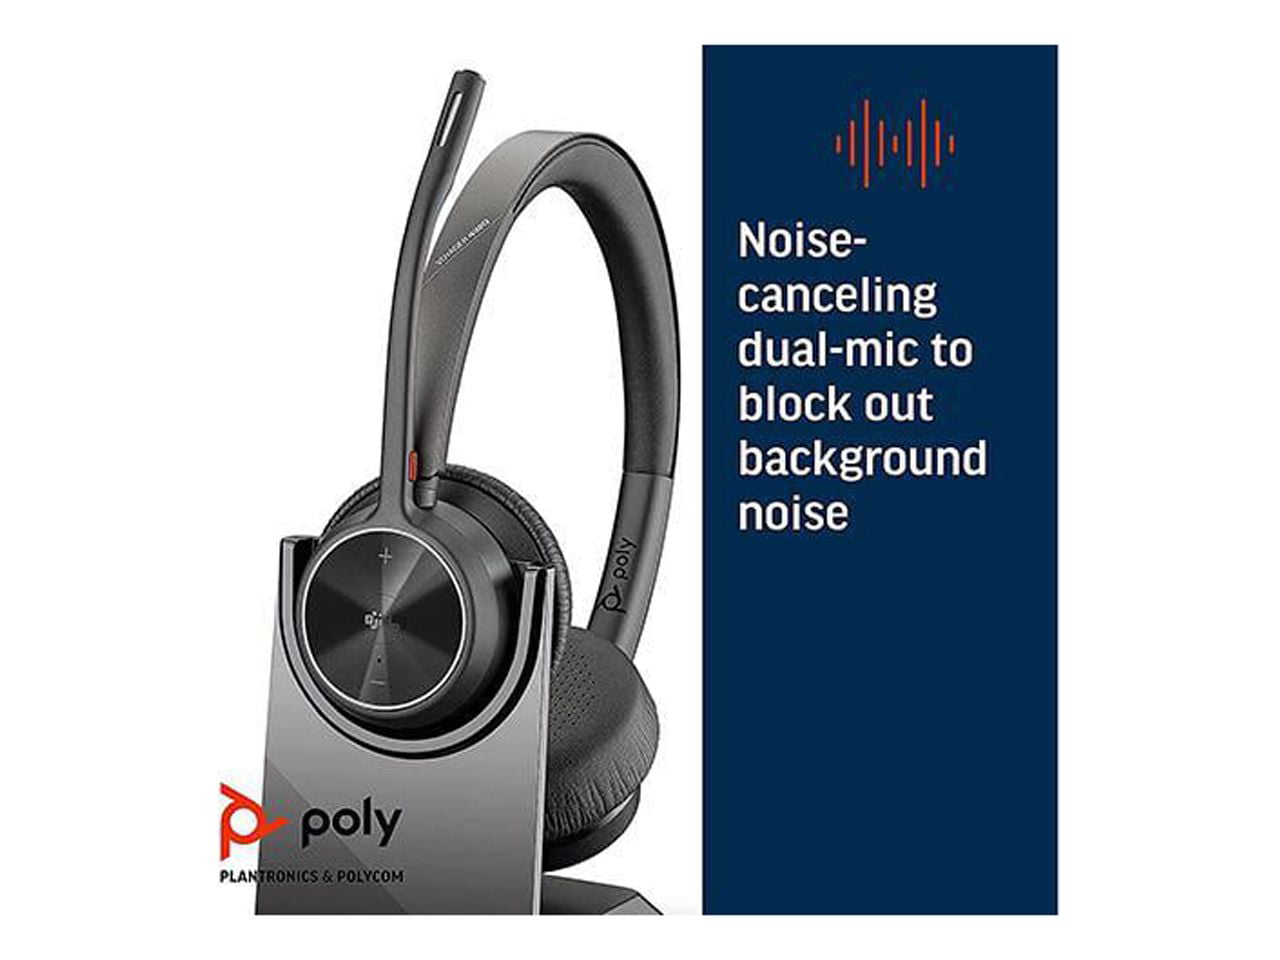 - - + (Plantronics) Adapter, Cell - Bluetooth-Works Voyager Poly Bluetooth via Wireless UC Zoom&More Headphones USB-A w/Mic Connect Charge Stand Headset (Certified), w/Teams PC/Mac Phone 4320 via to